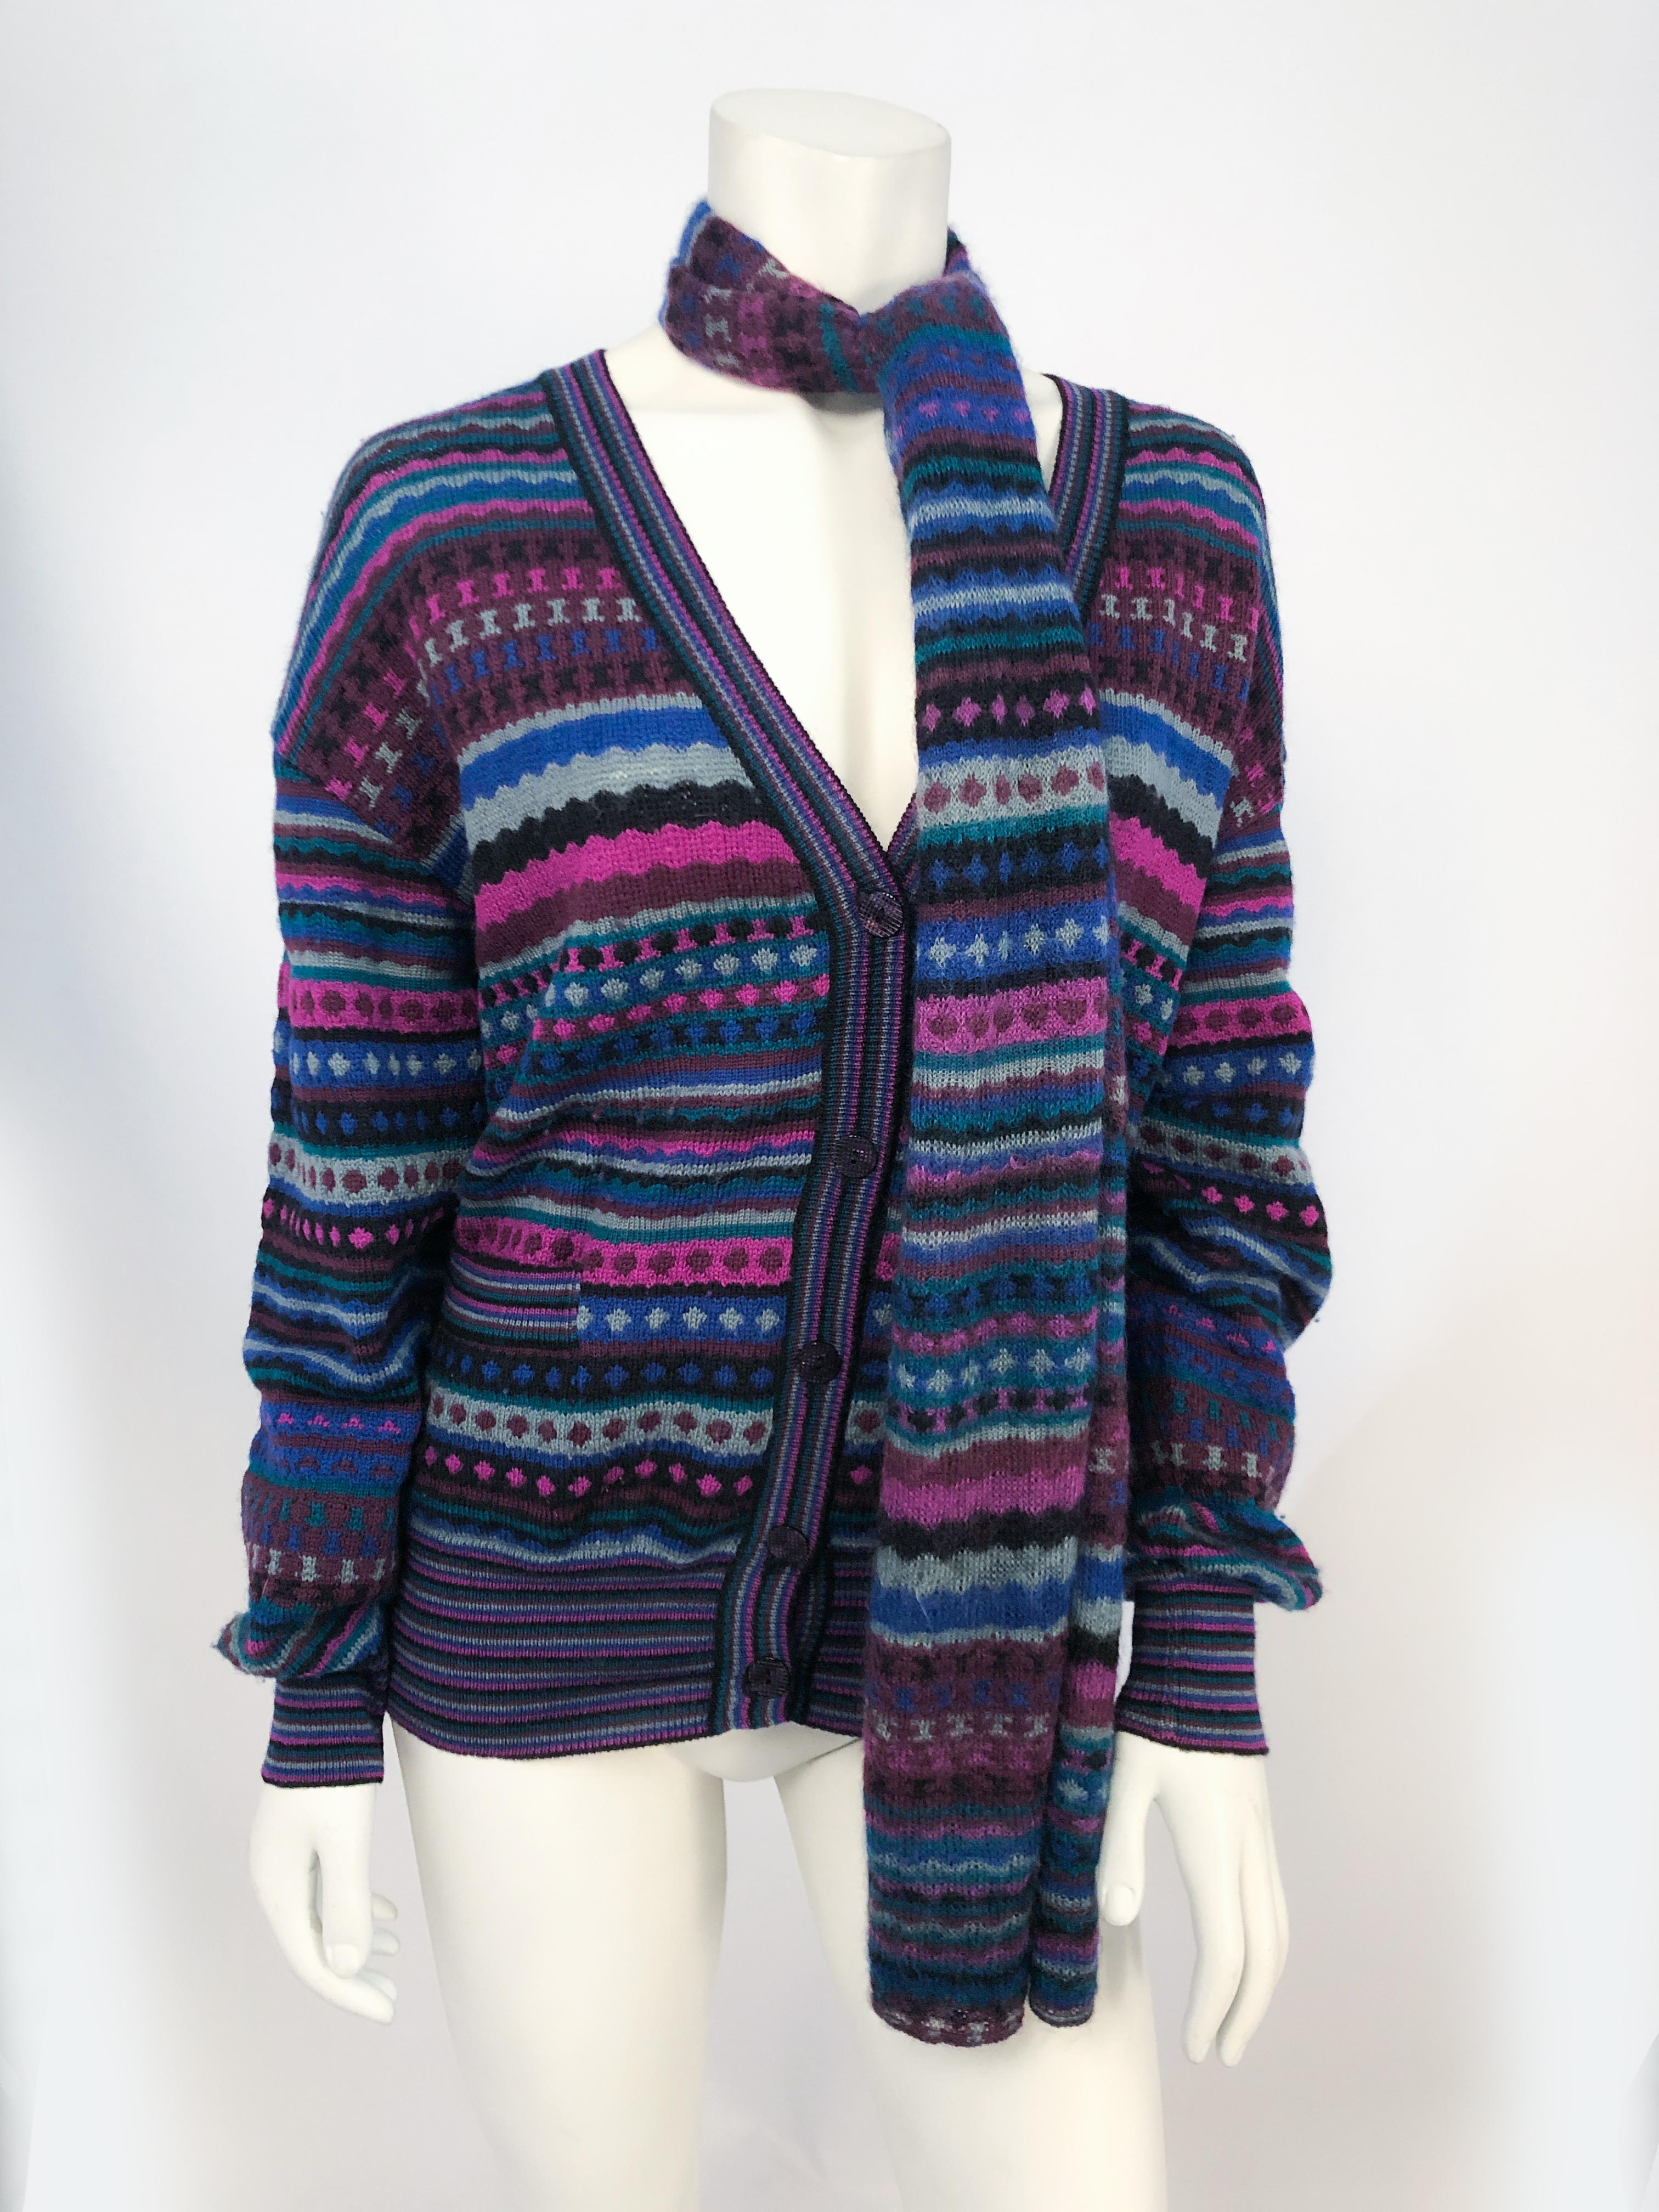 1970s Missoni Knit Cardigan with Matching Scarf featuring stripes and diamonds in purple, blue, green, and grey.